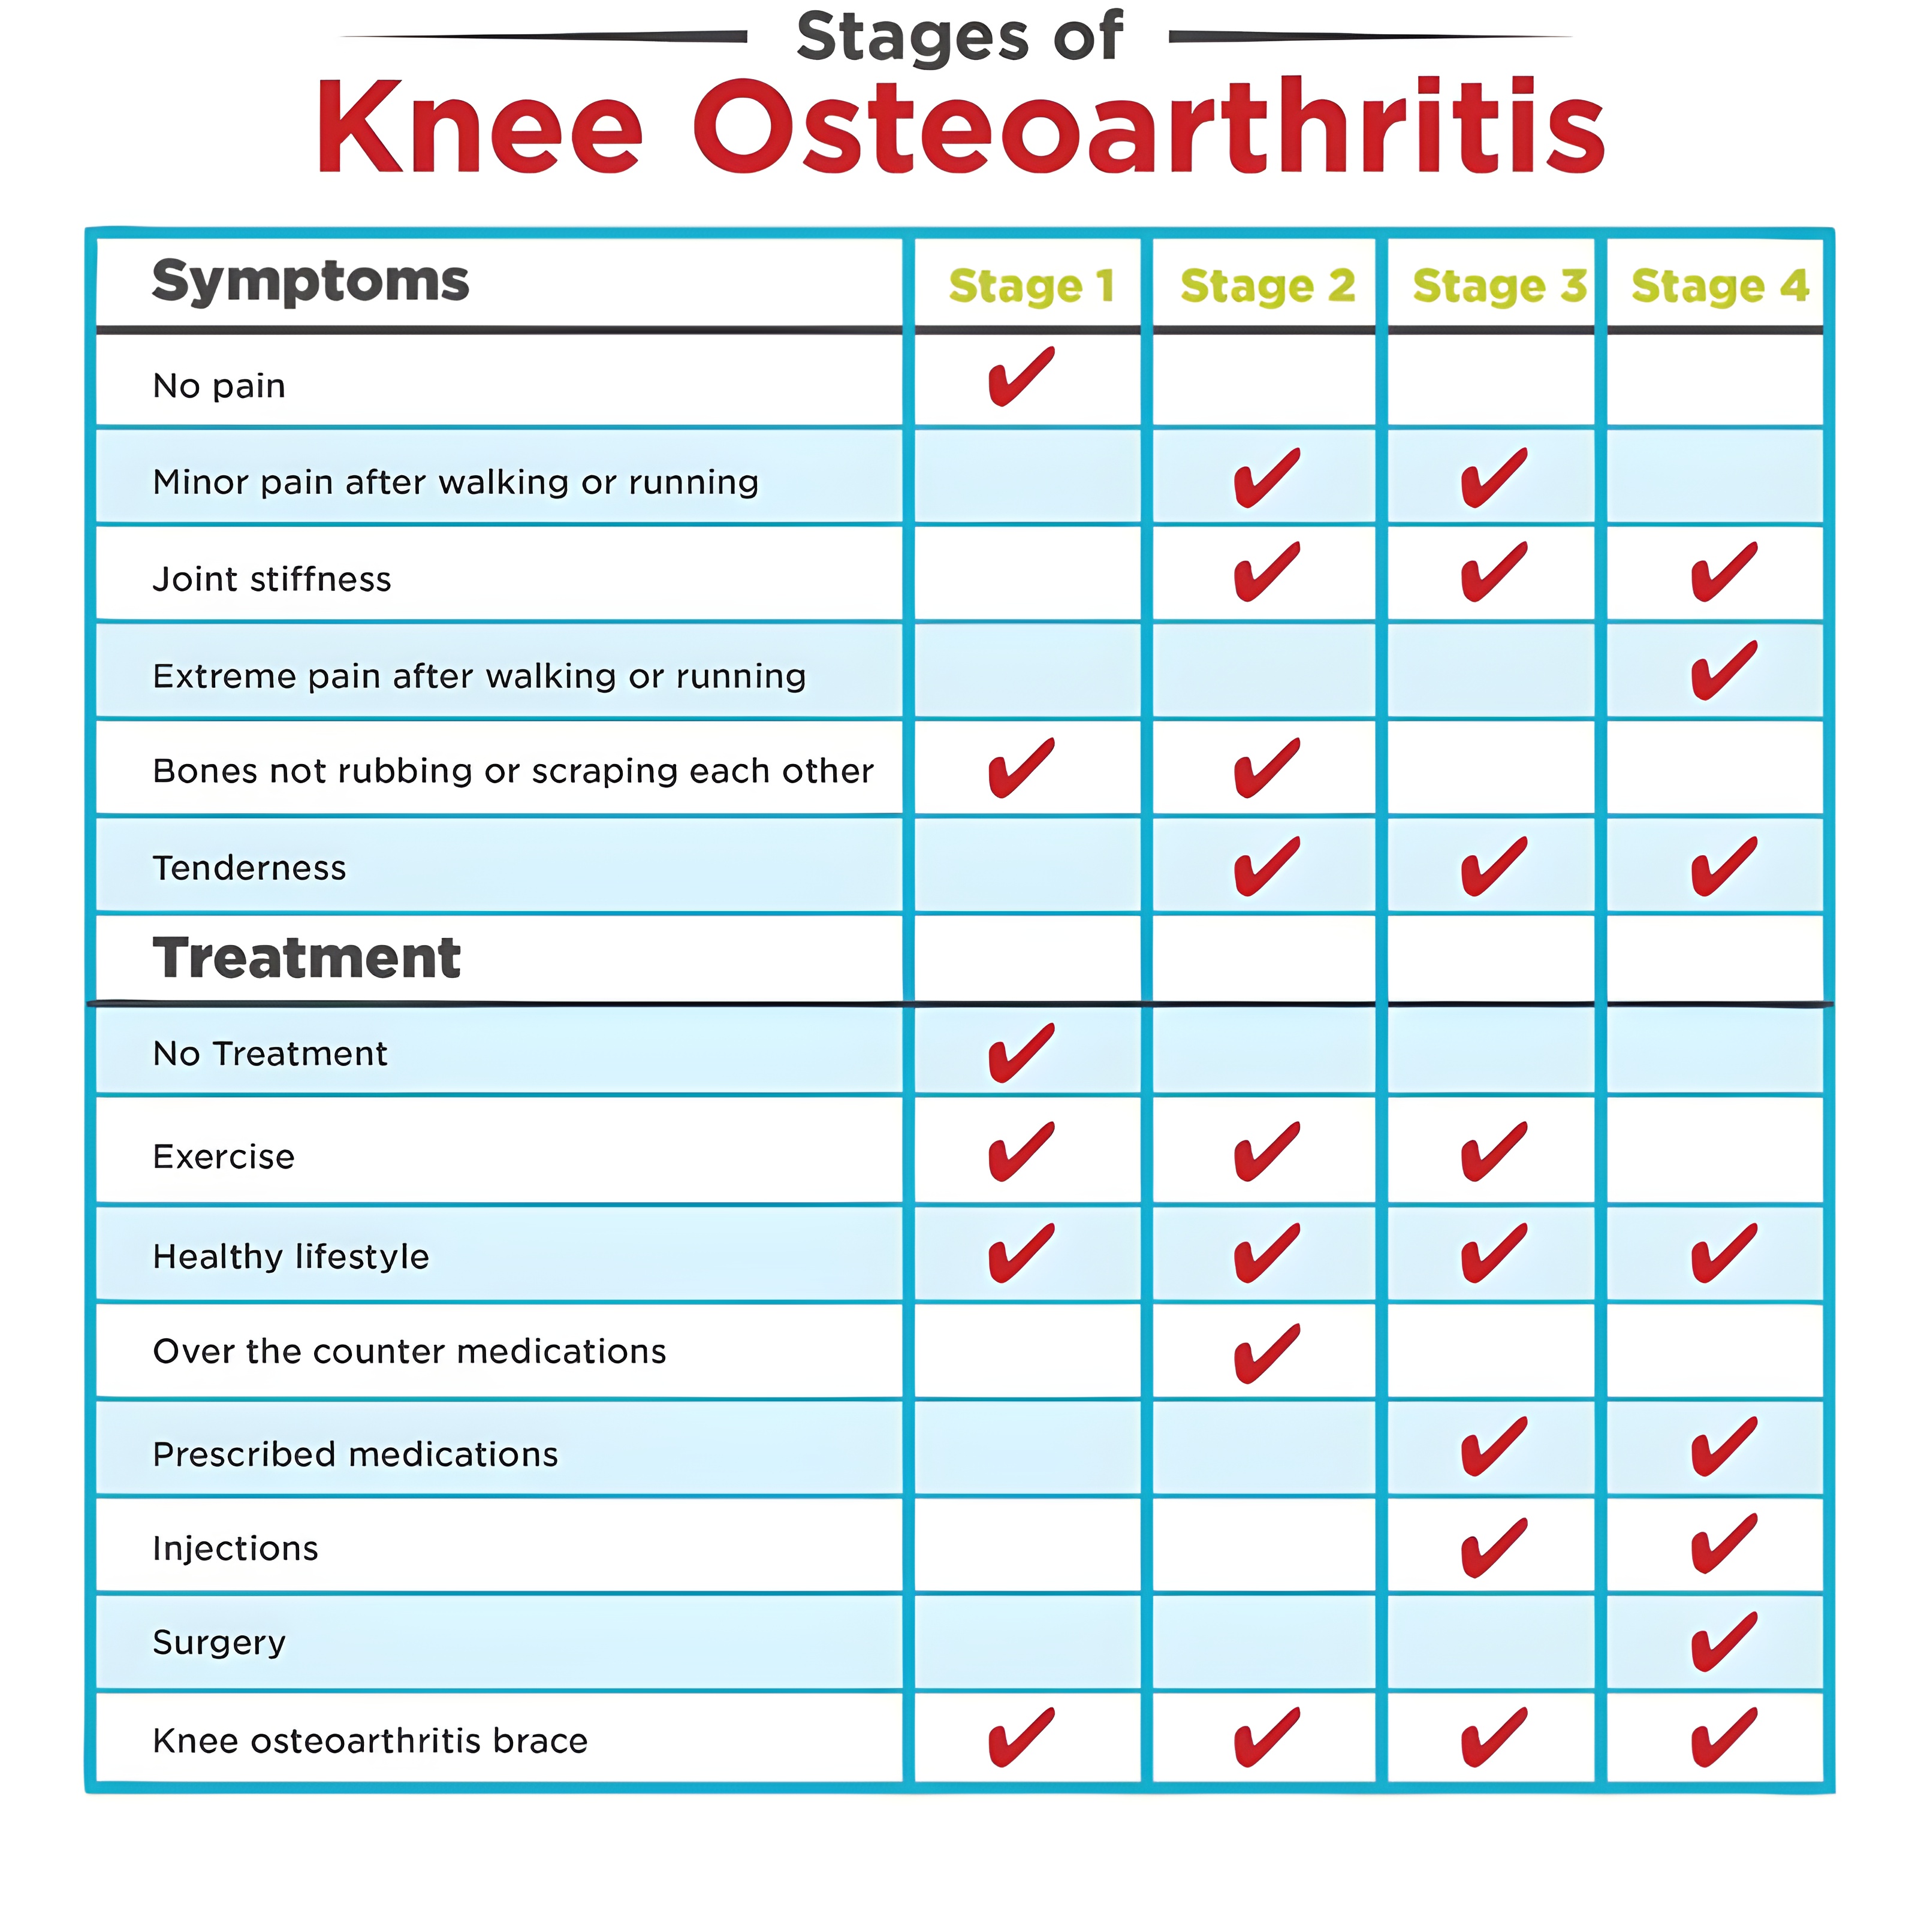 Table of symptoms of osteoarthritis at different stages